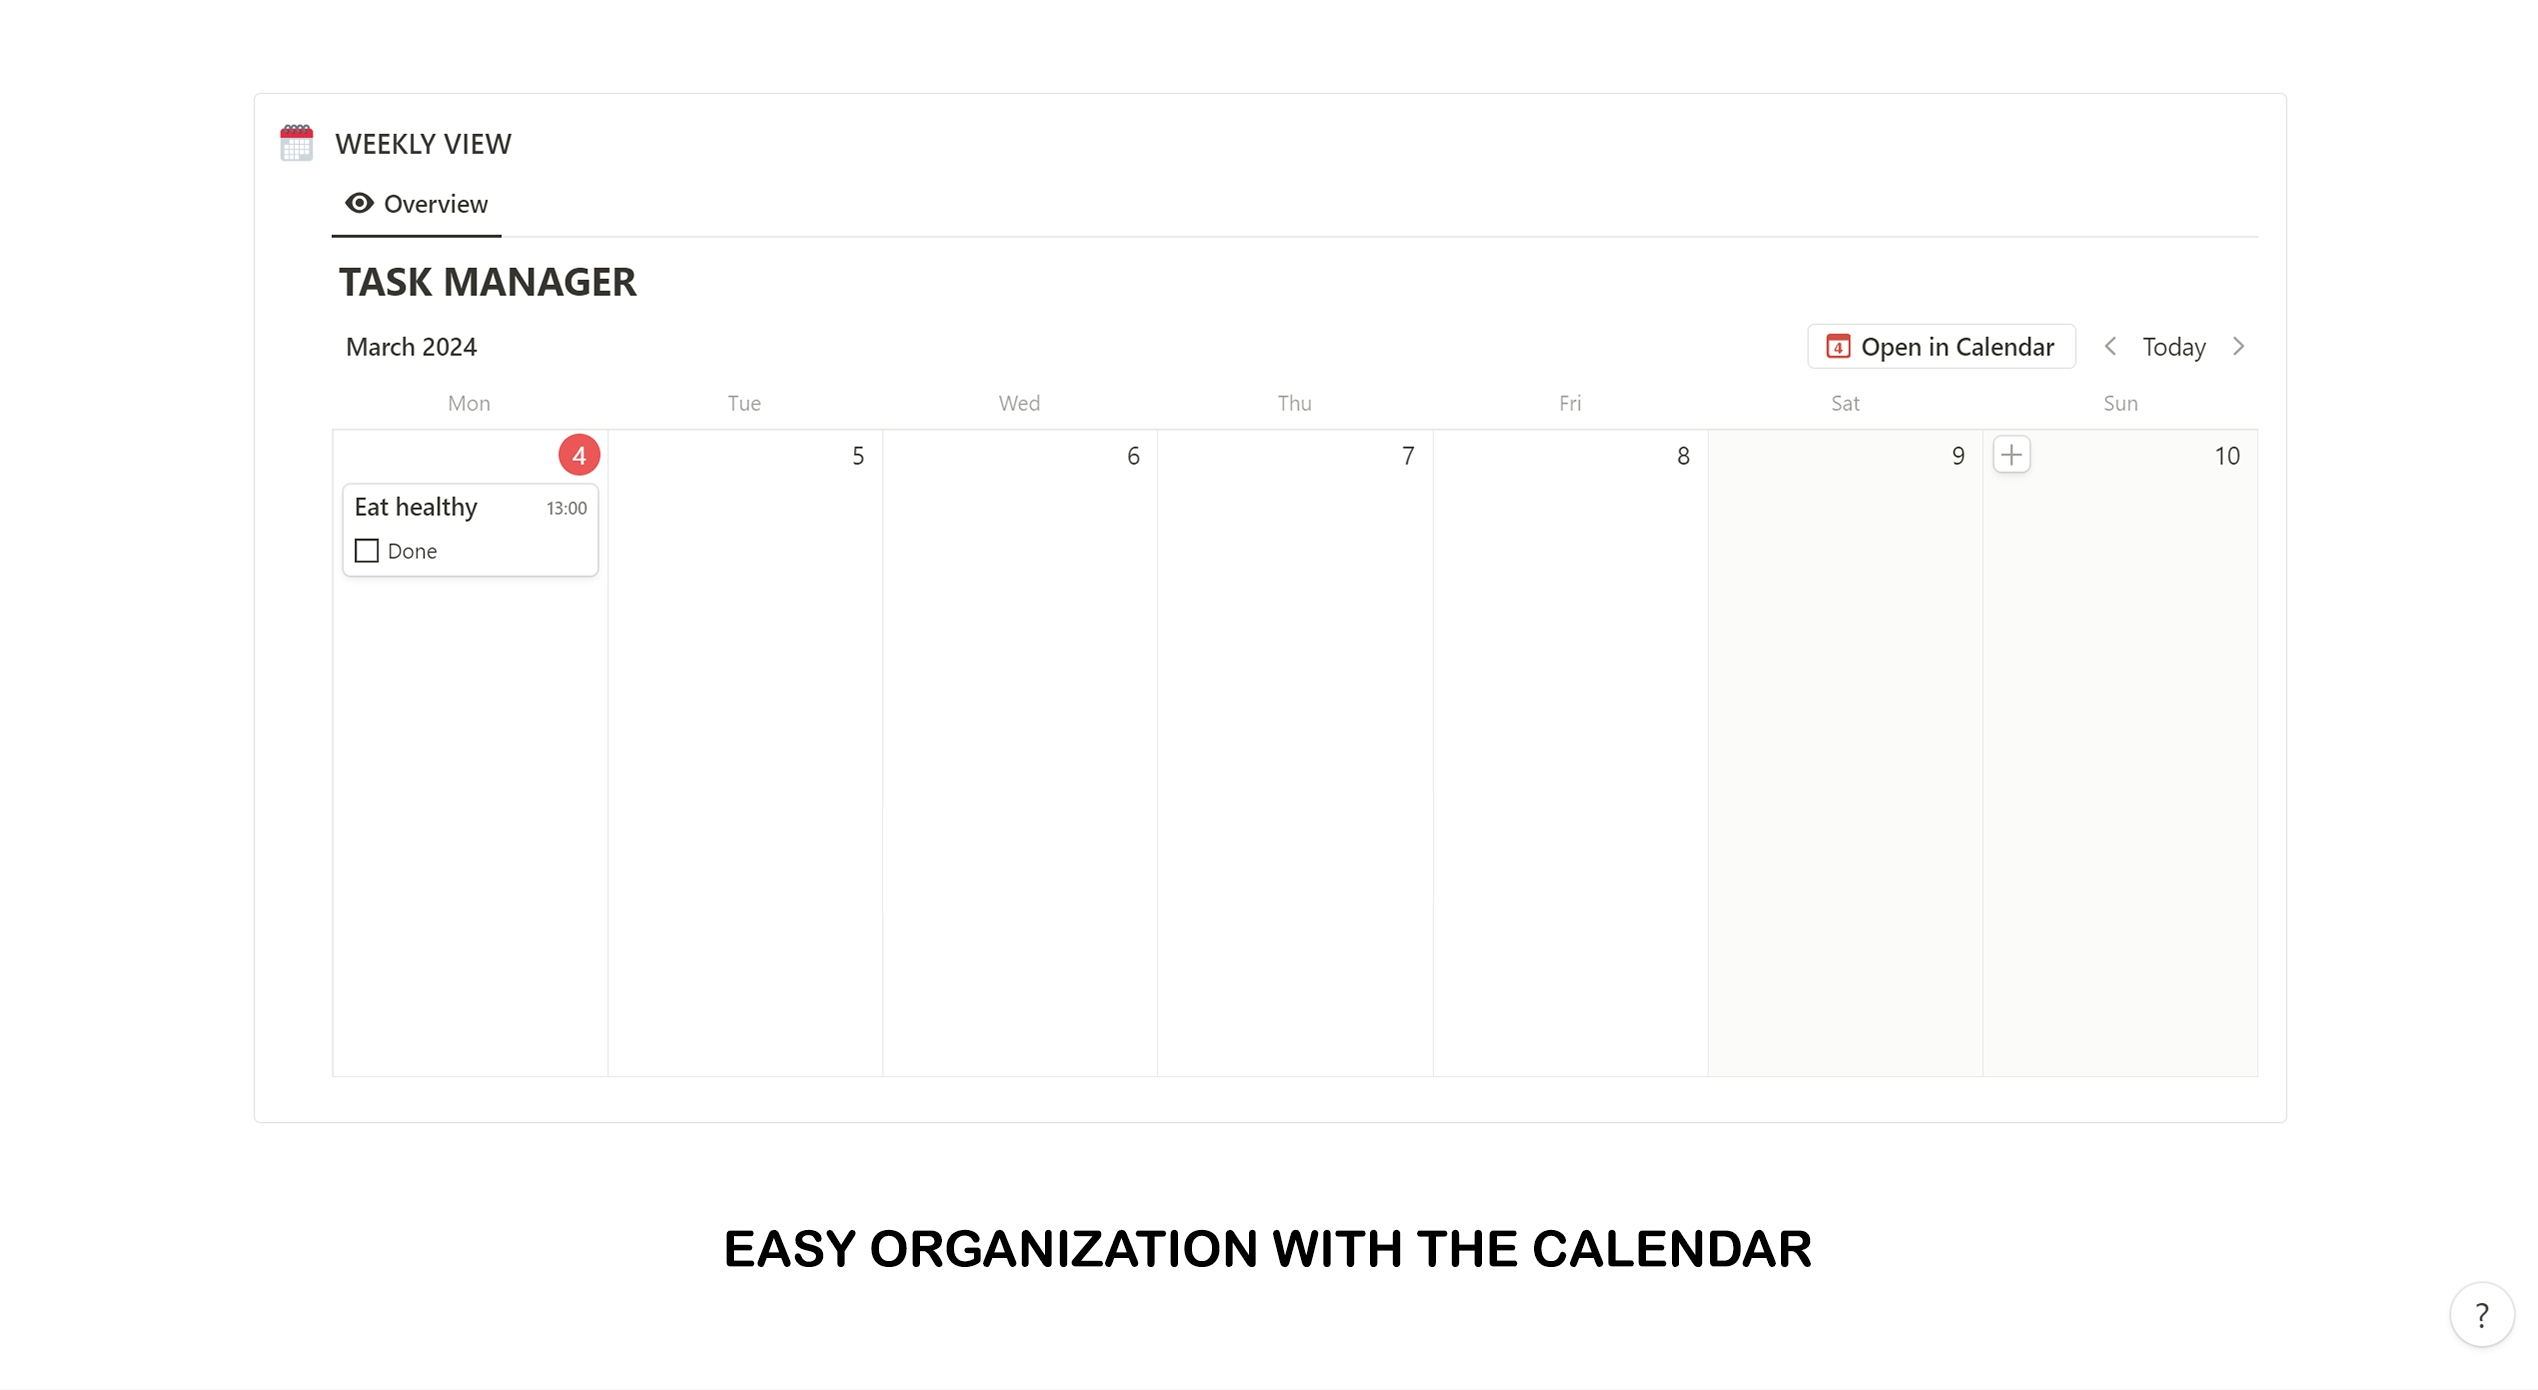 Organize your tasks simply and effectively